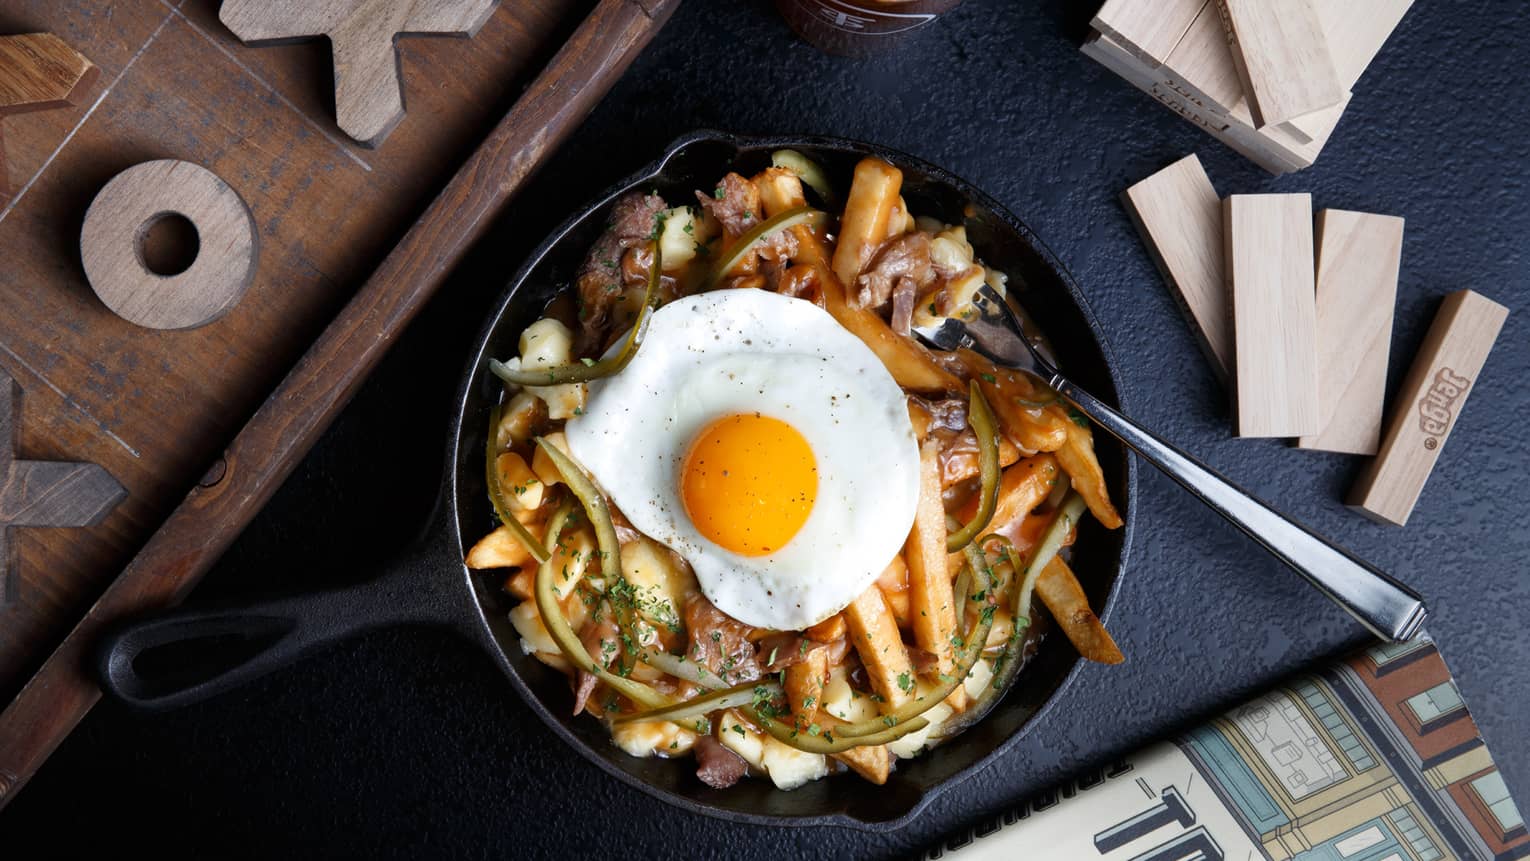 A skillet filled with fries, various spices and a fried egg.